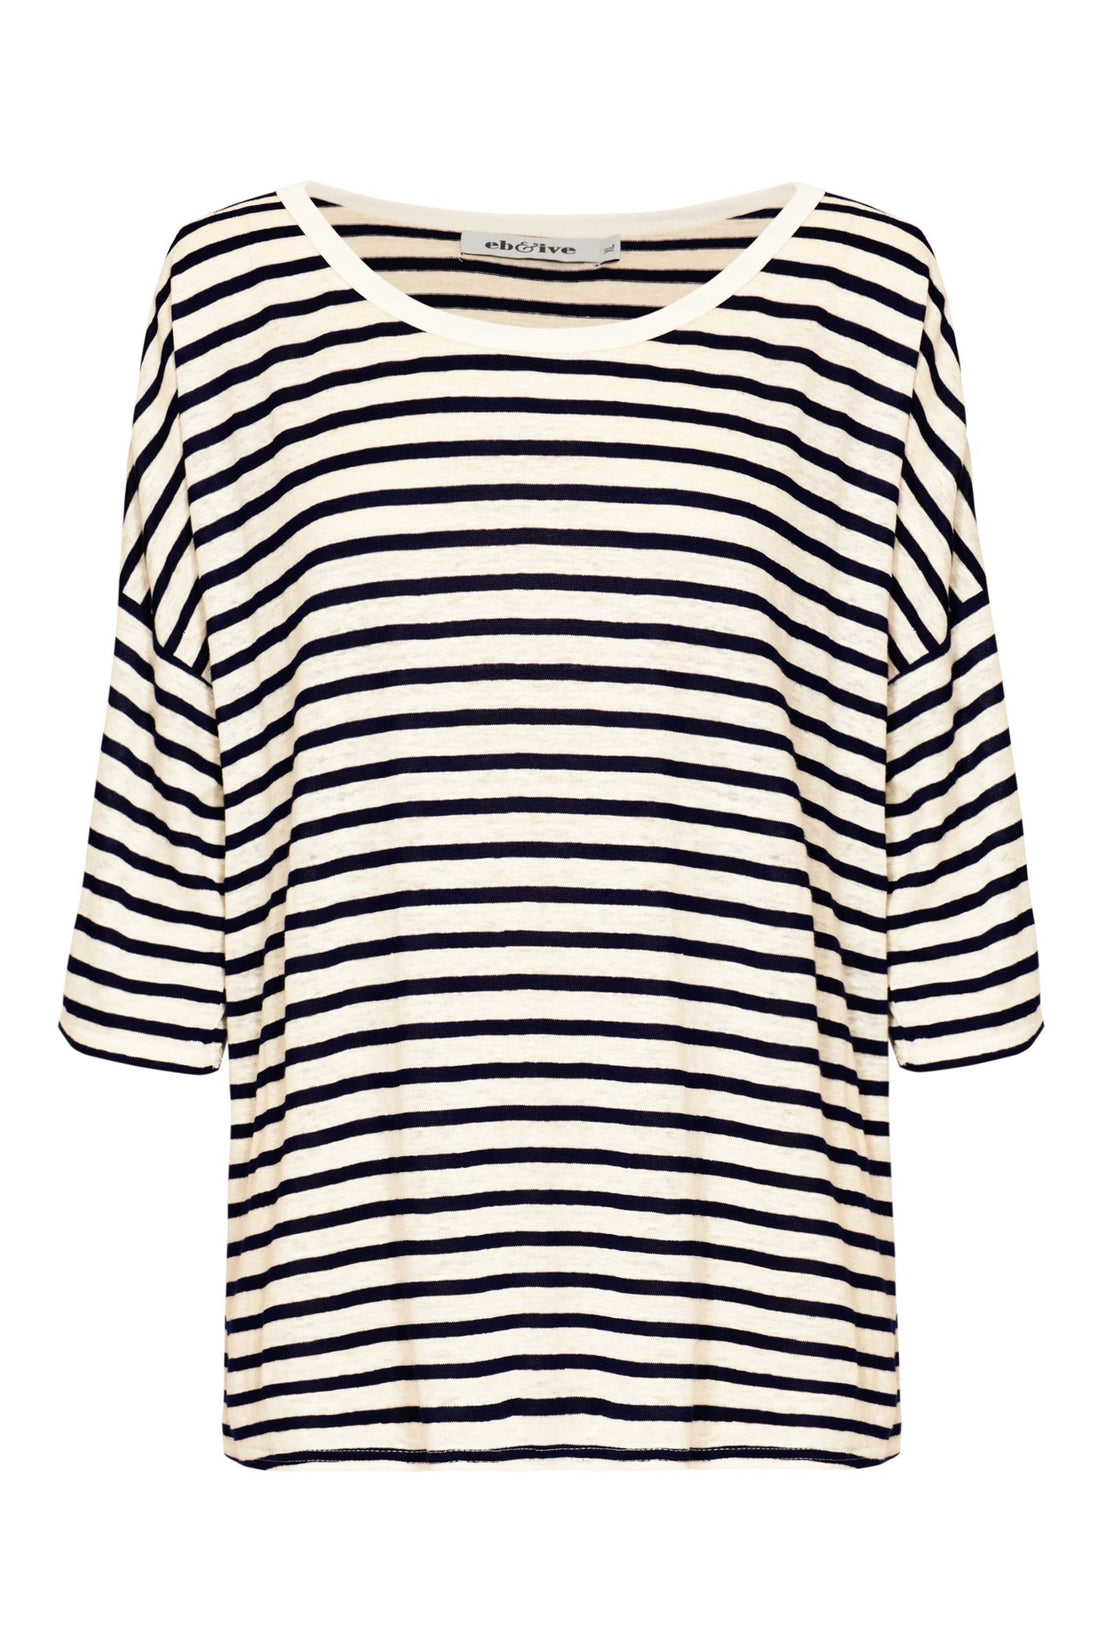 Eb &amp; Ive Striped Navy and White Top